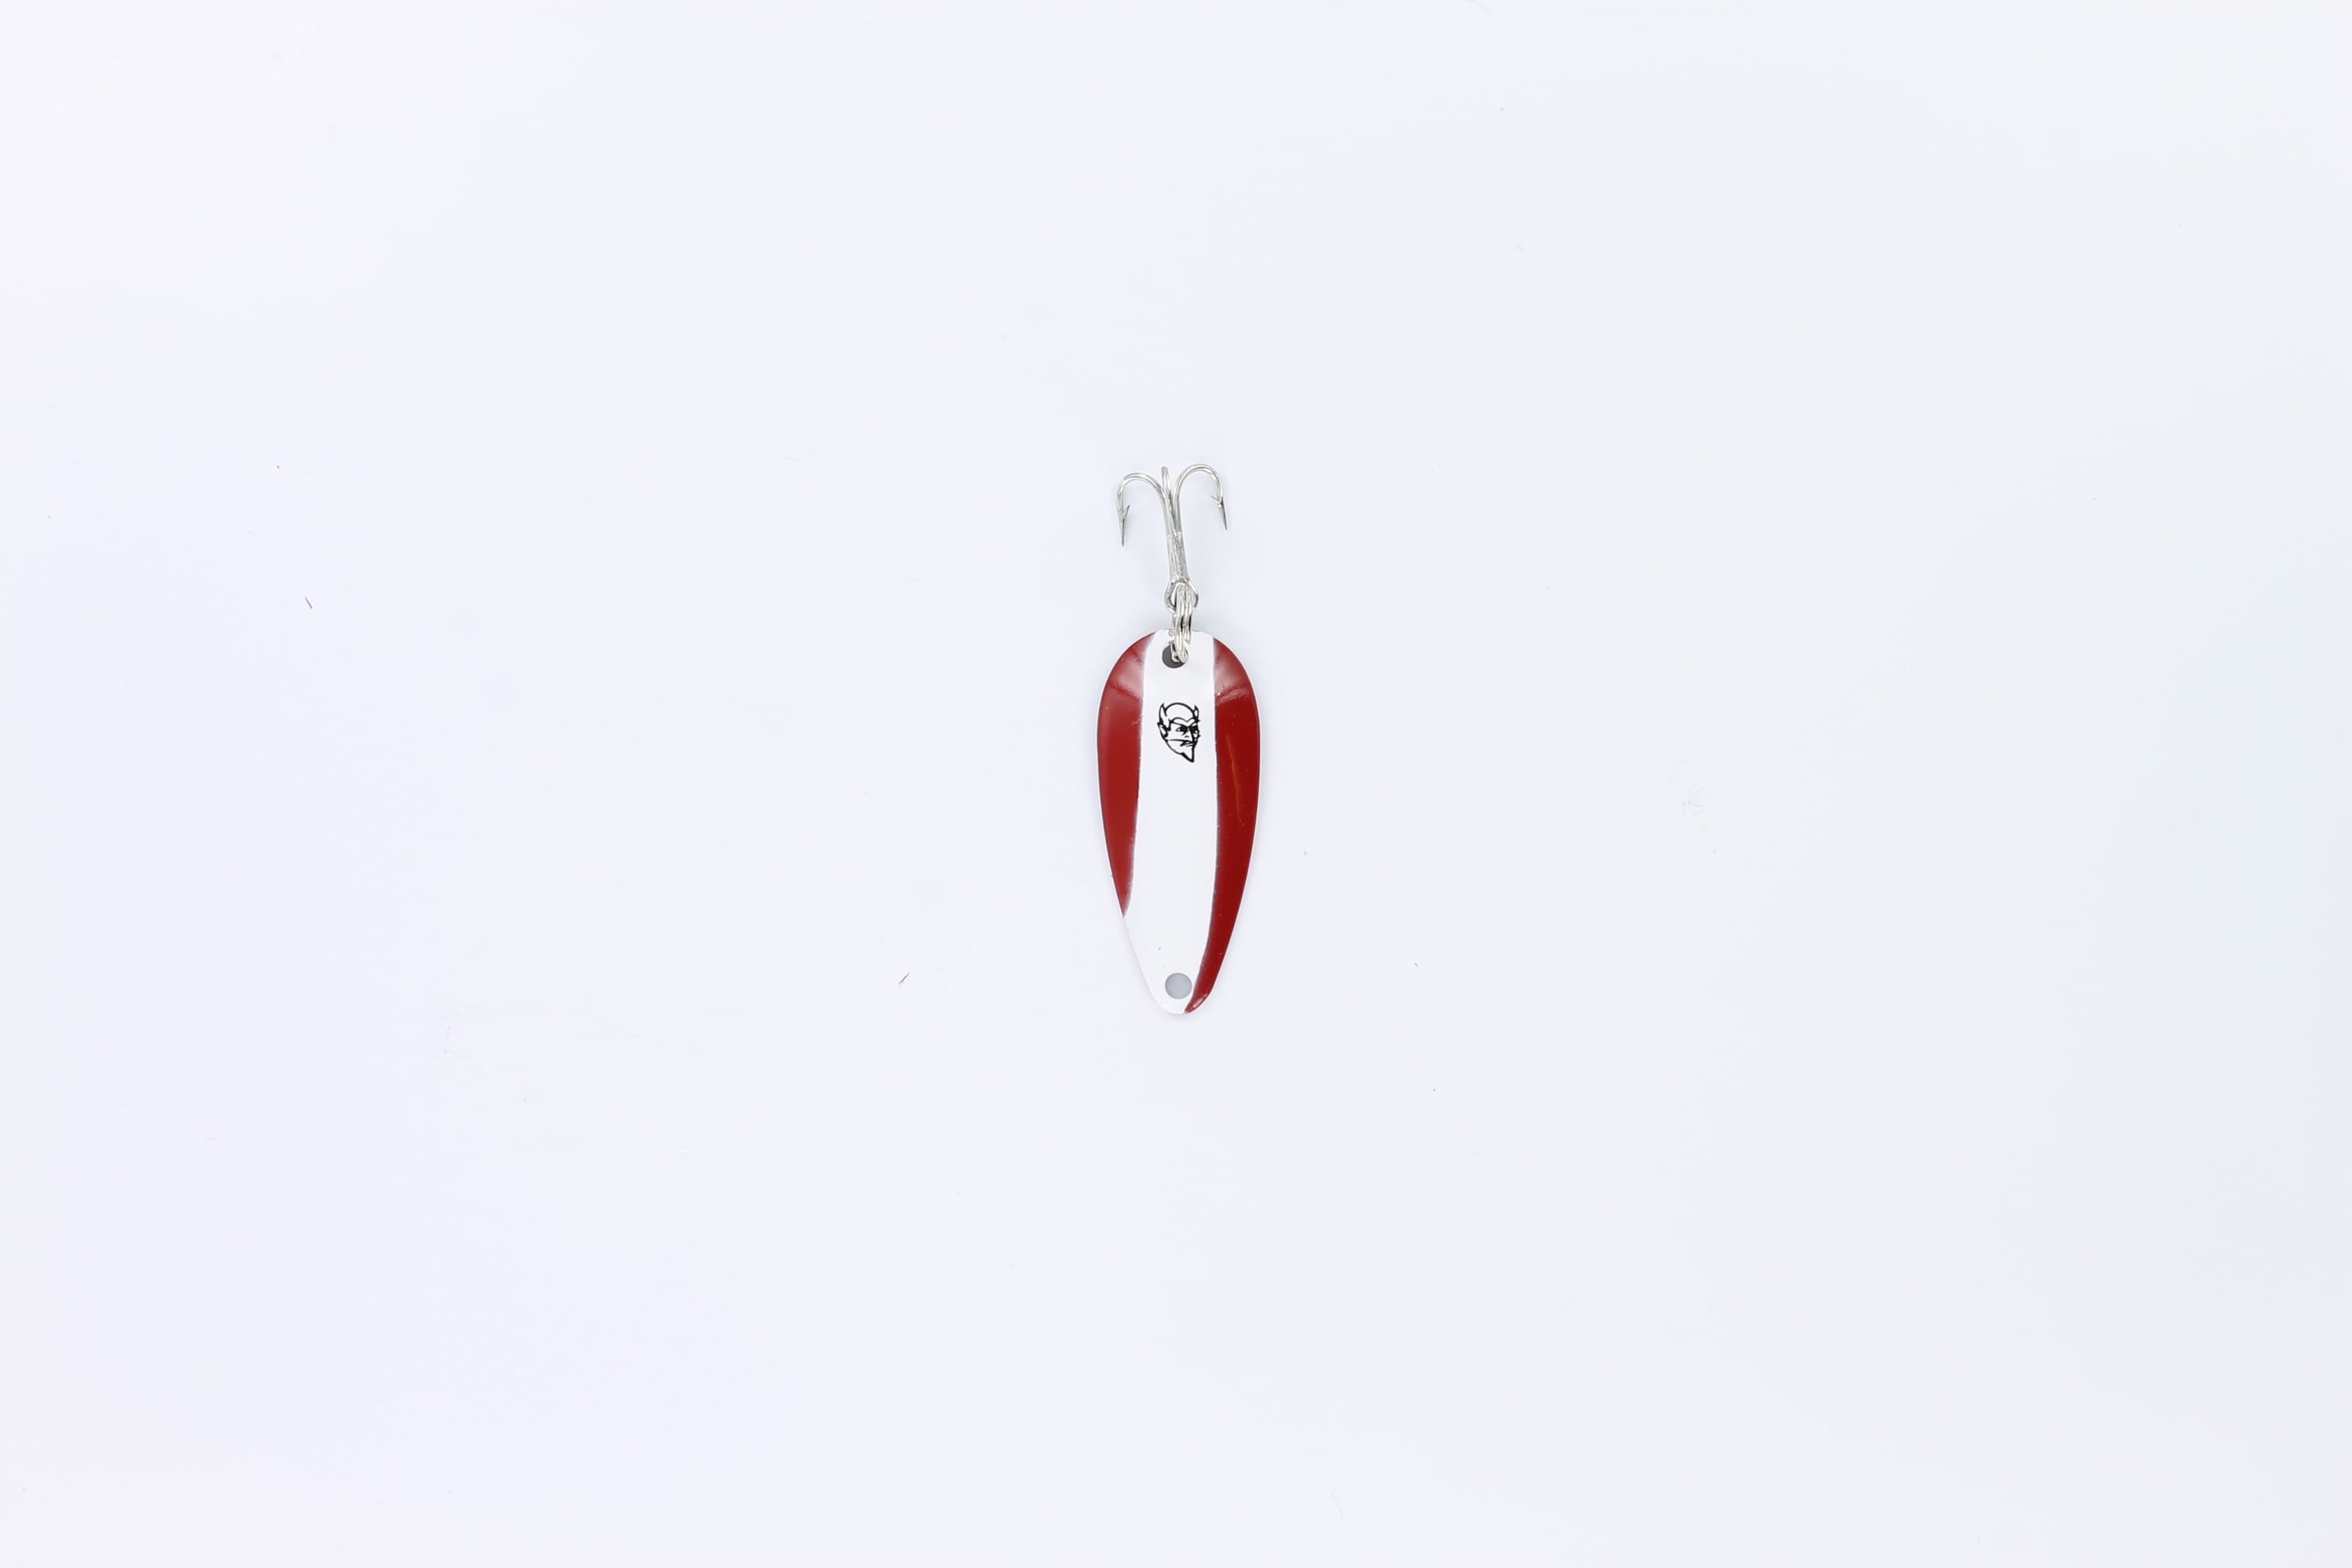 Eppinger 1316 Lil' Devle Spoon 1 1/8" x 1/2" 1/8 oz Red And White 